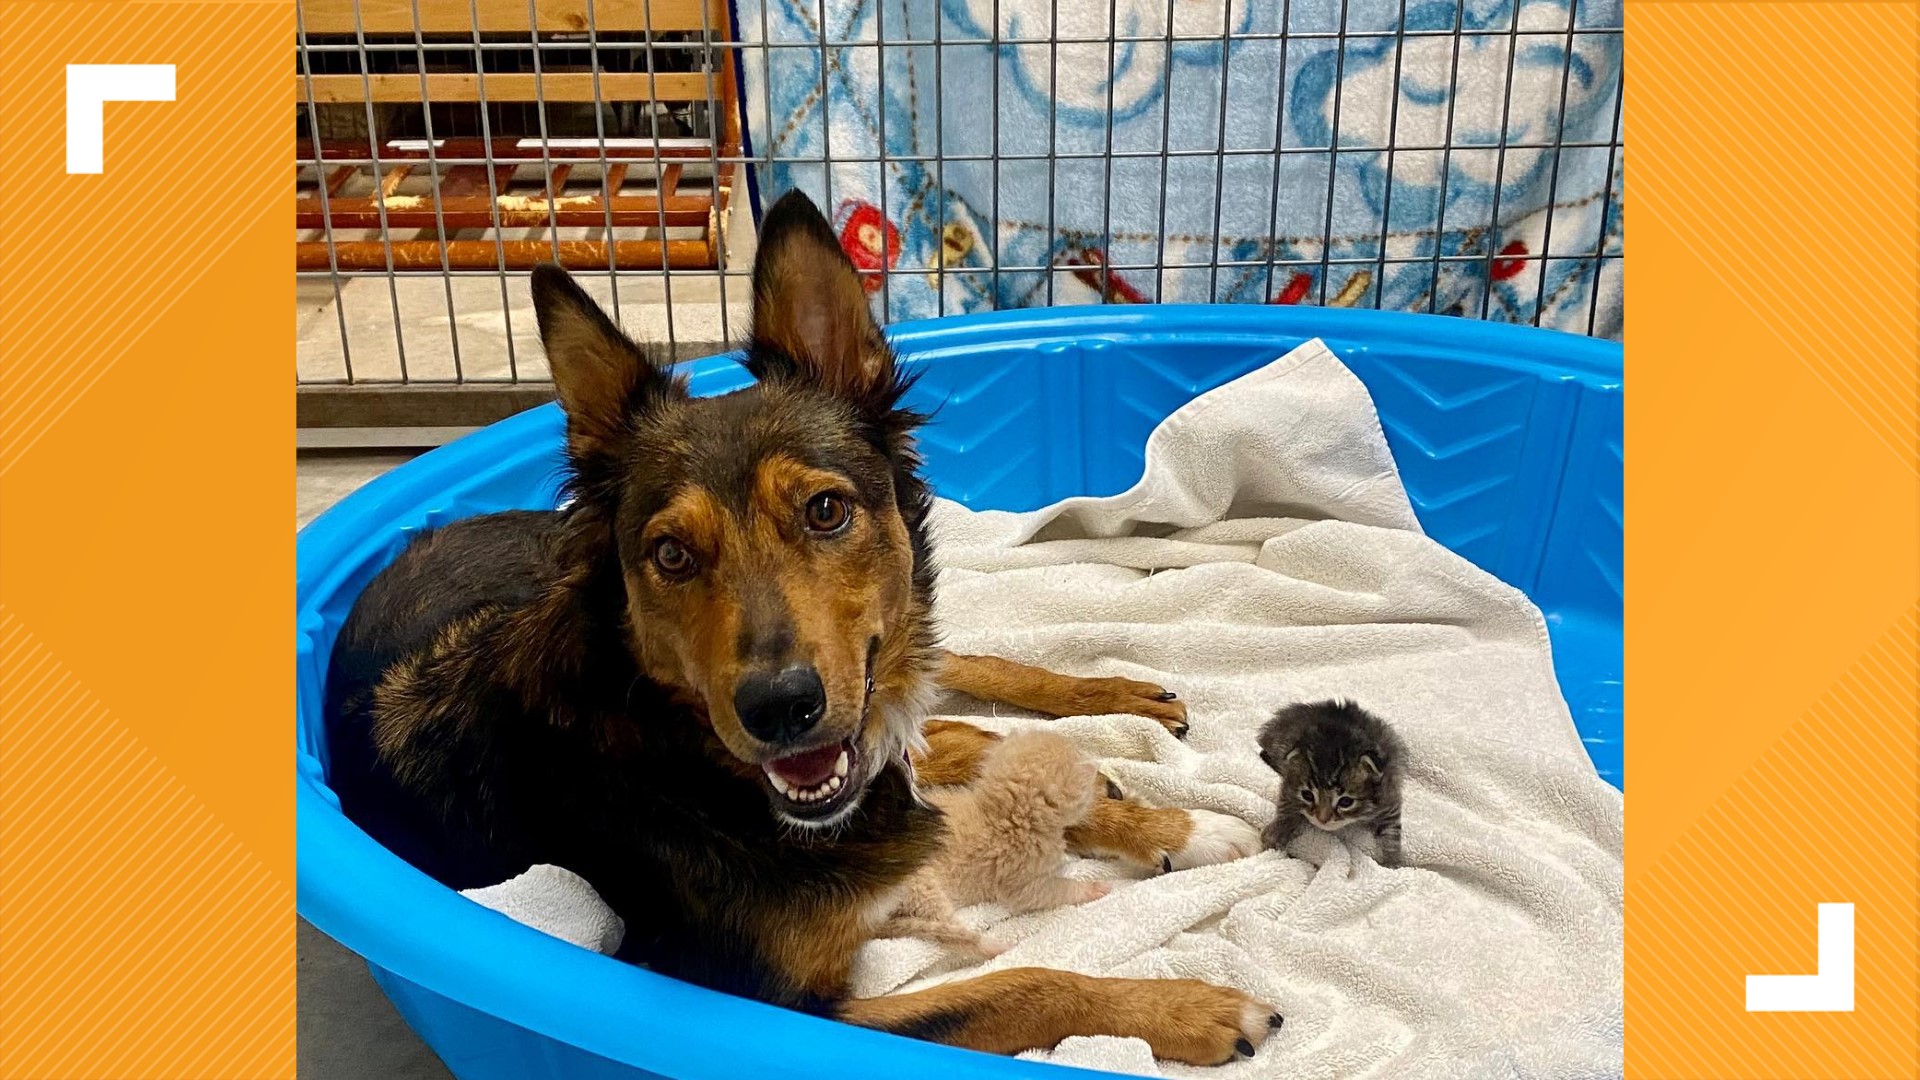 After losing her puppies, Georgia the dog takes in some orphaned kittens at a Phoenix shelter.